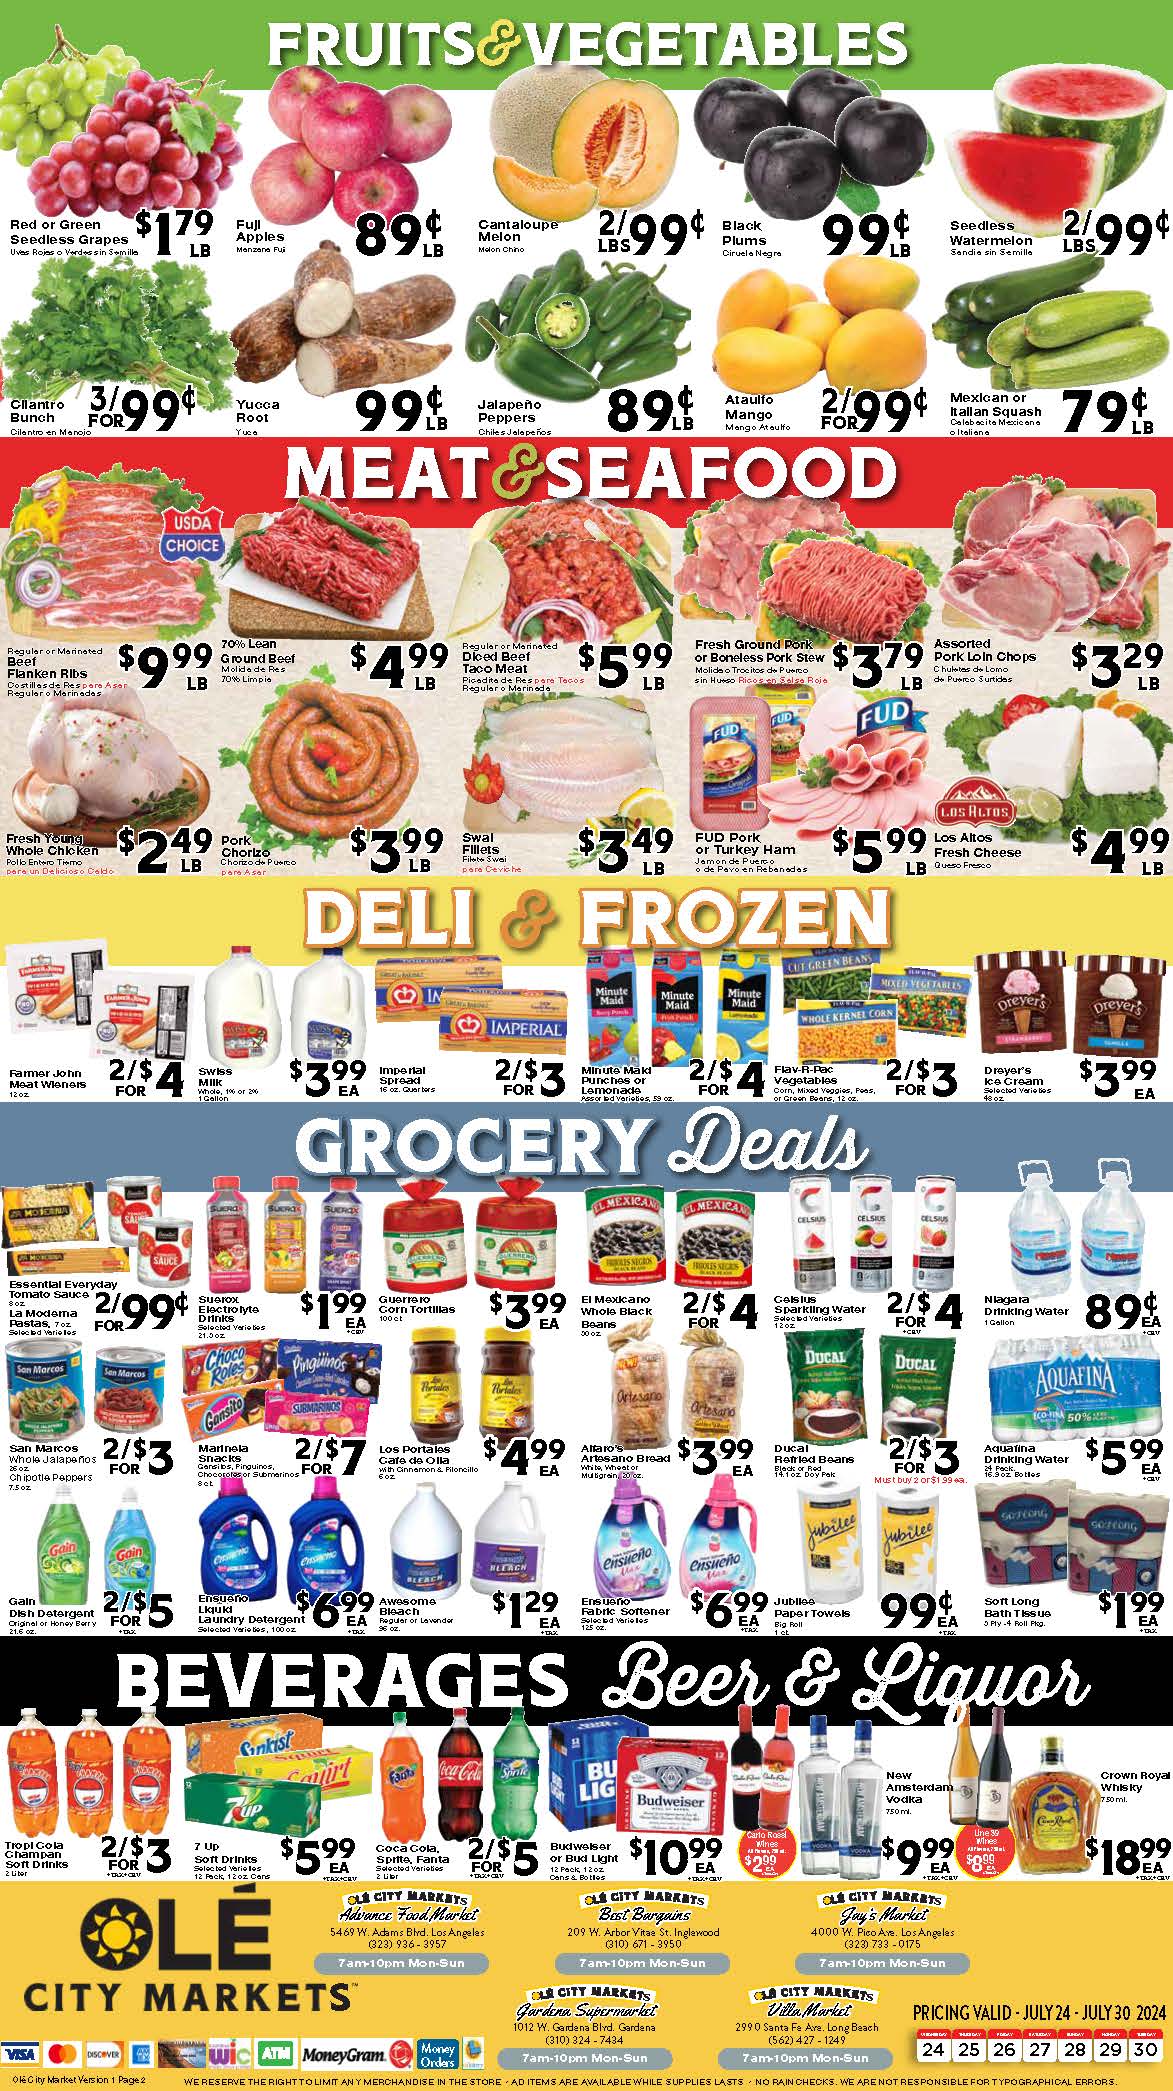 Weekly Ad from 03/22/23 to 03/28/23 page2